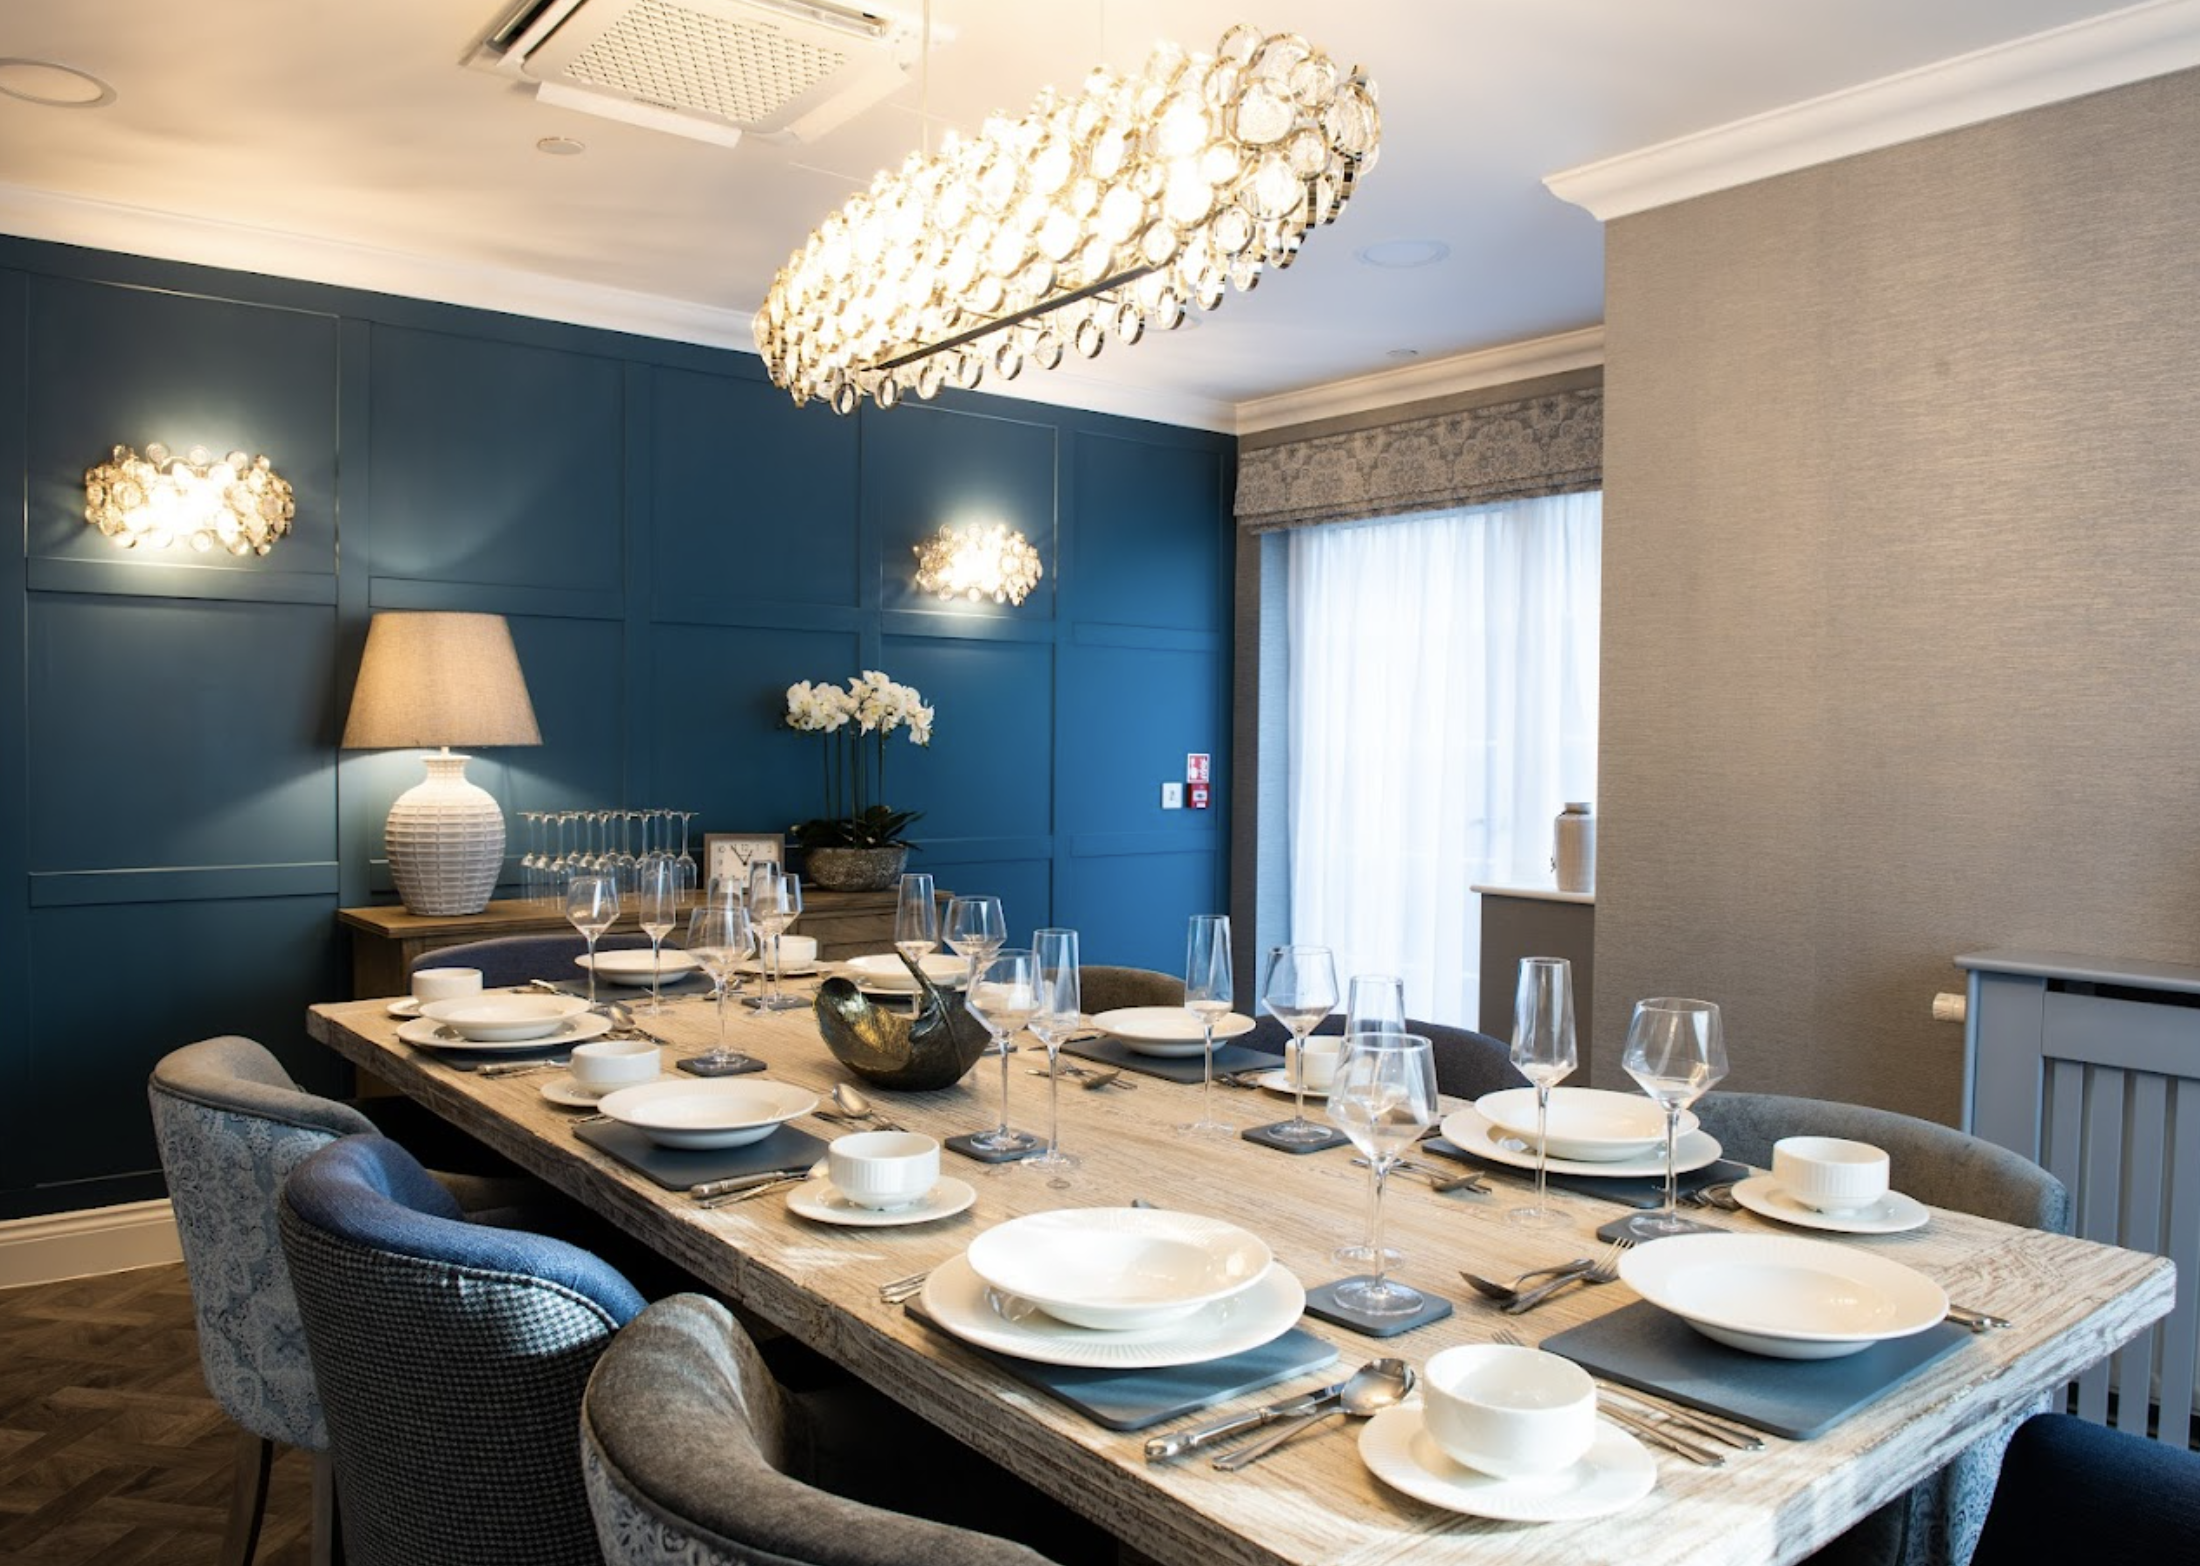 Private dining area of Burford Grange care home in Rickmansworth, Hertfordshire 